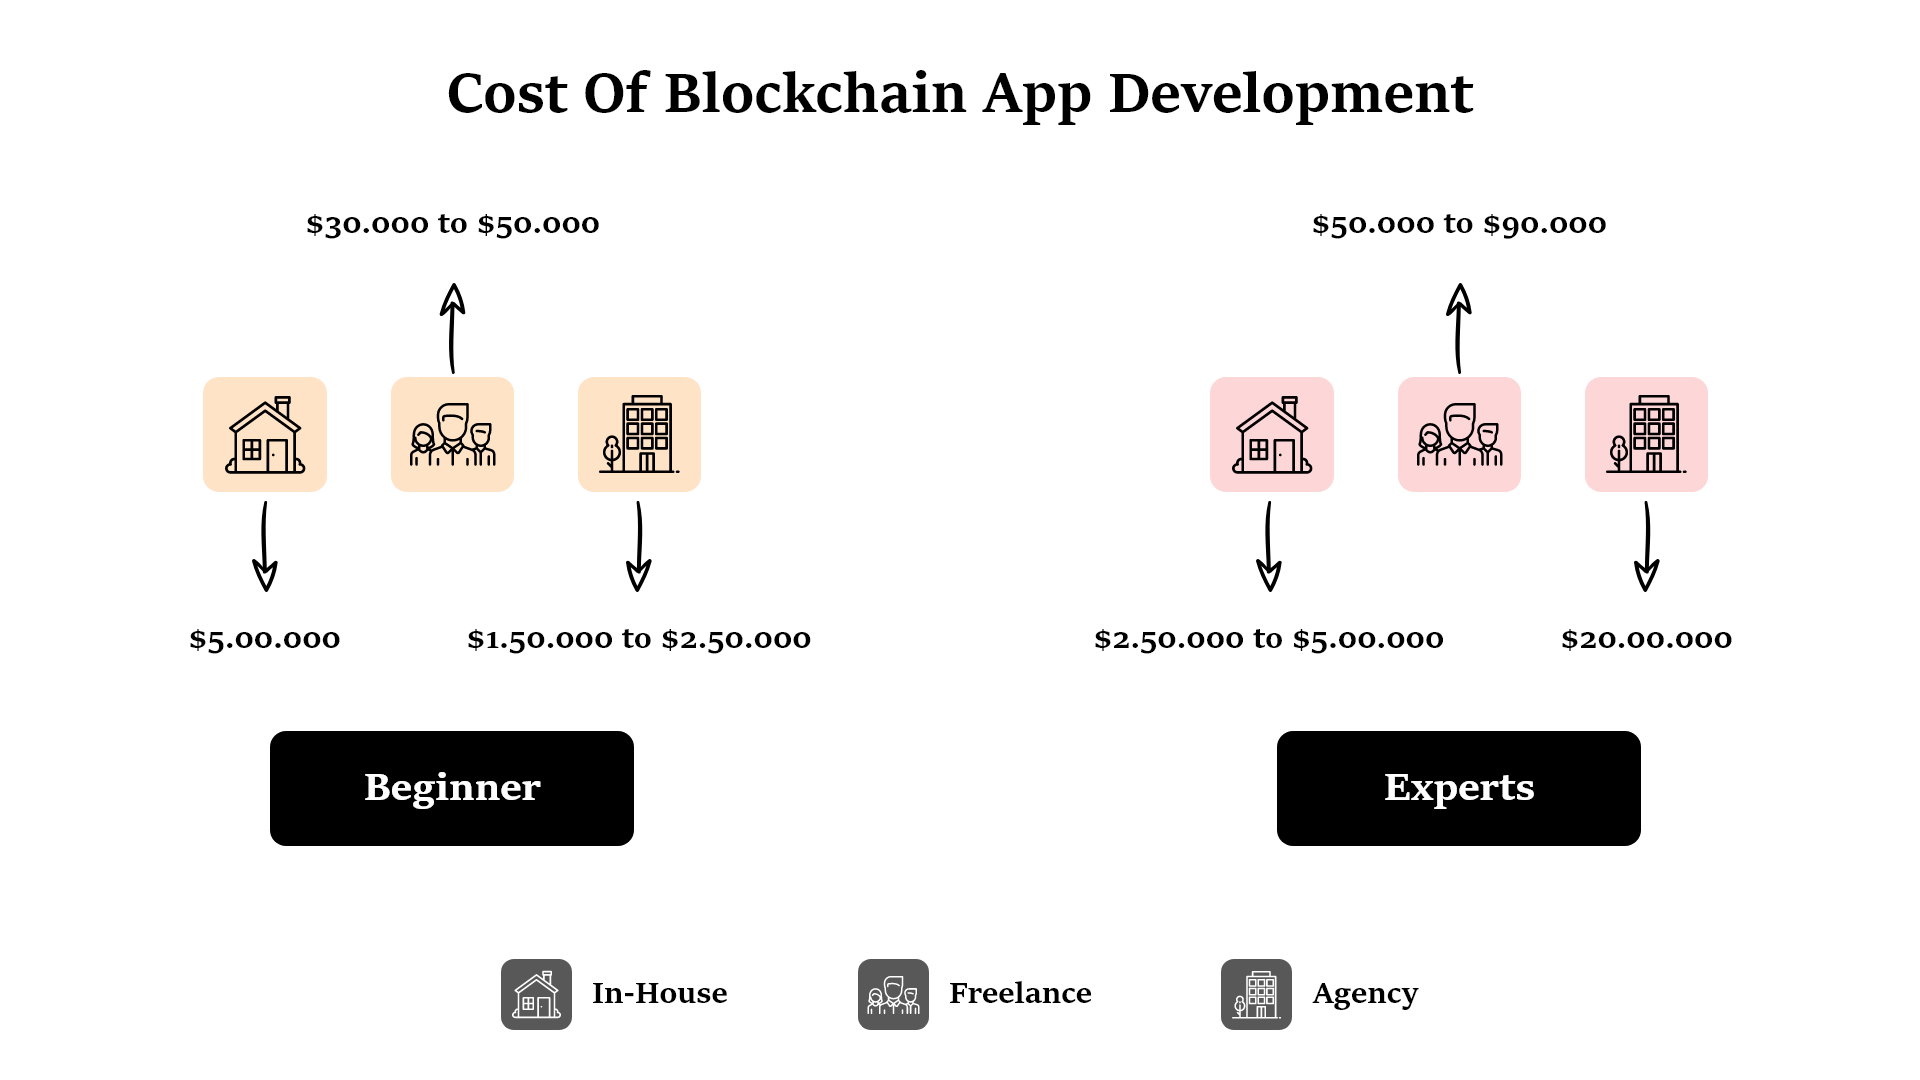 How To Build A Blockchain (In 5 Simple Steps)